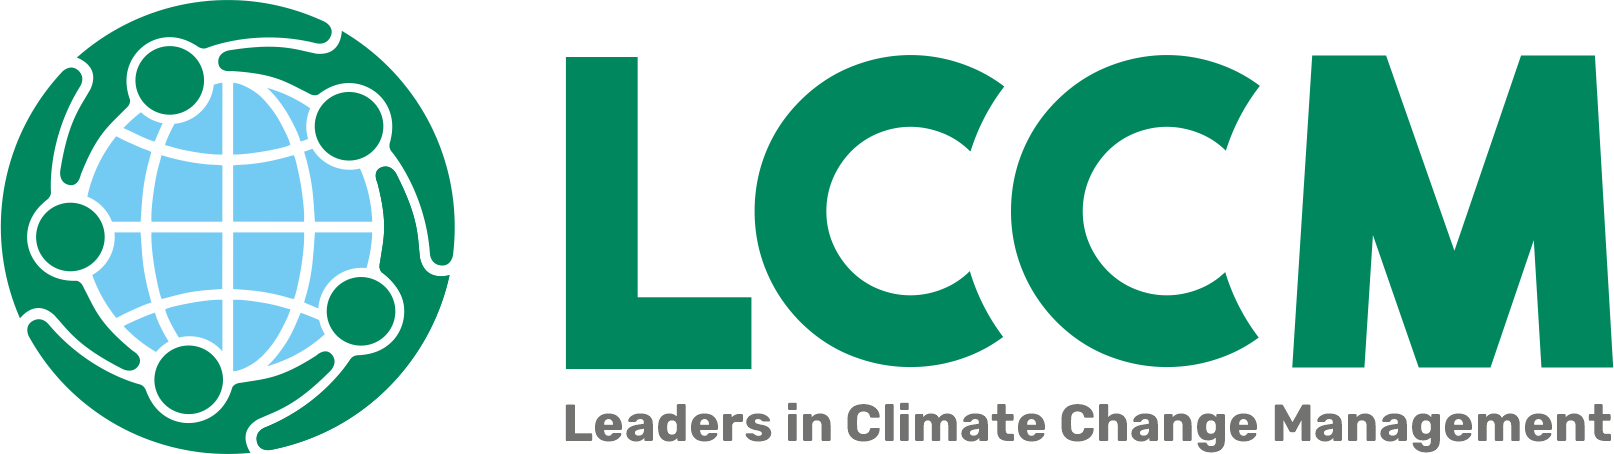 Leaders in Climate Change Management